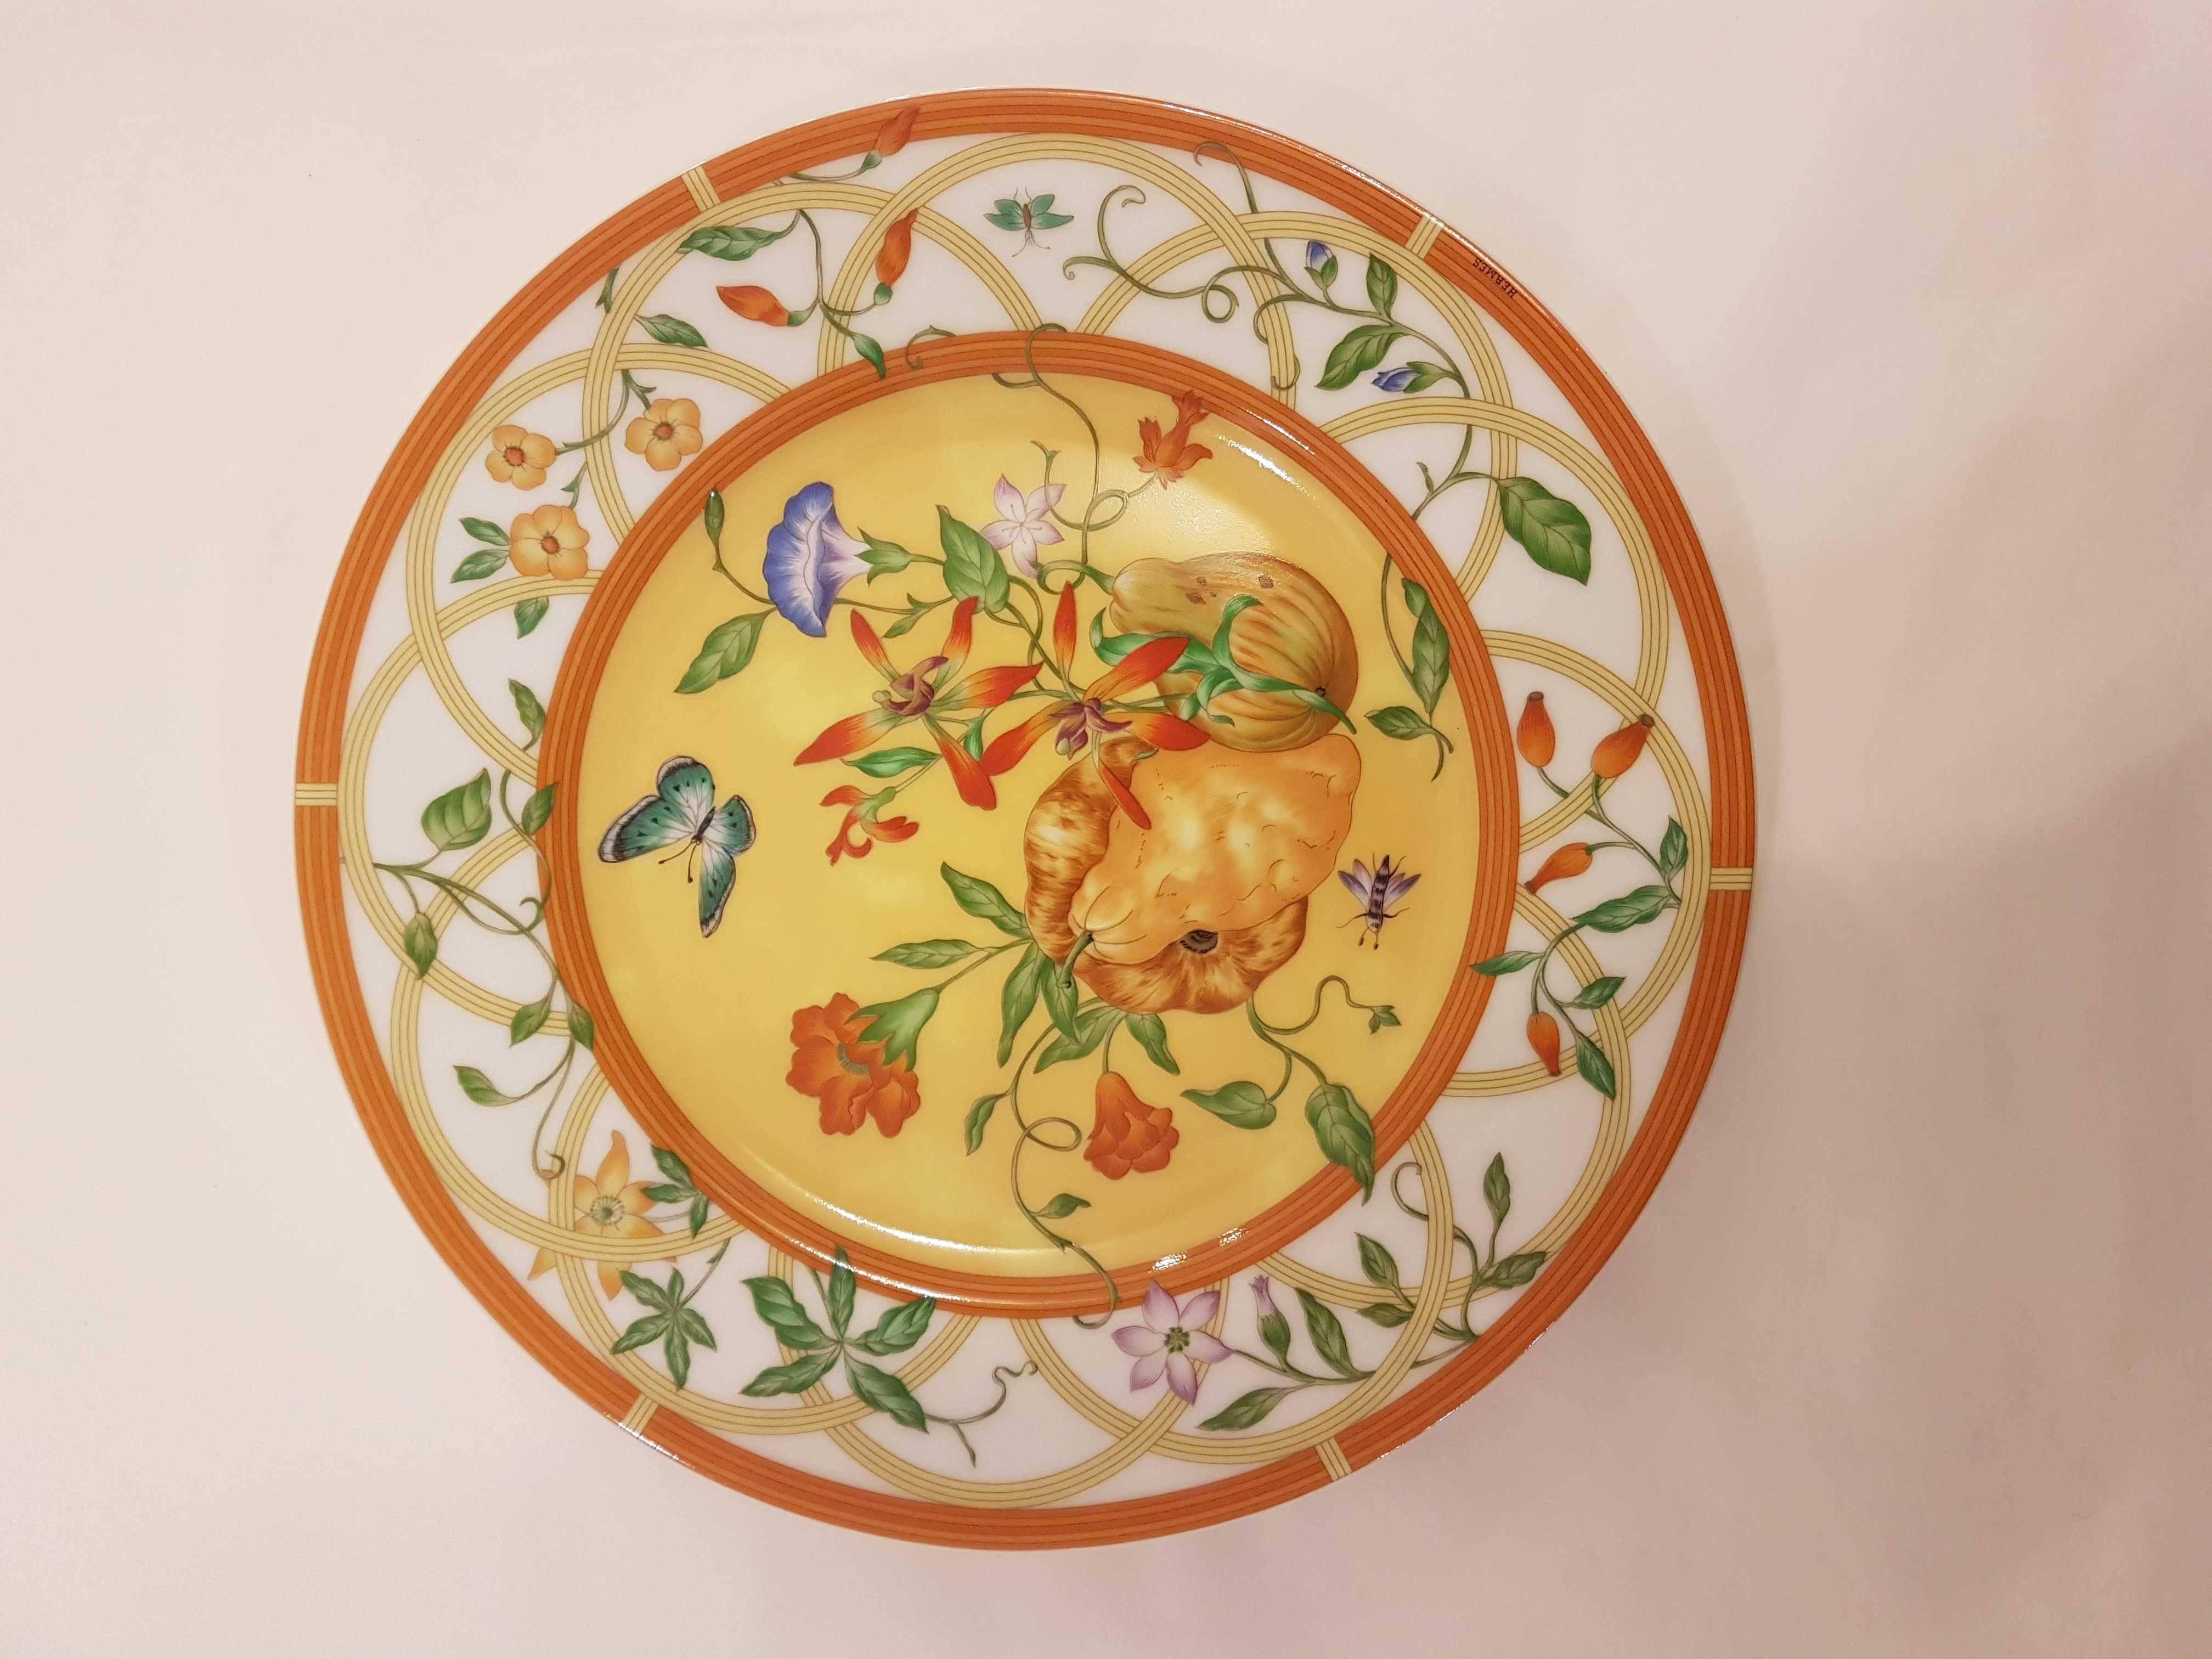 An Hermès polychrome porcelain set of six cake plates.
Siesta pattern decorated with a motif of flowers, fruits and butterflies.
Pattern discontinued today
In his original Hermès orange paper box.